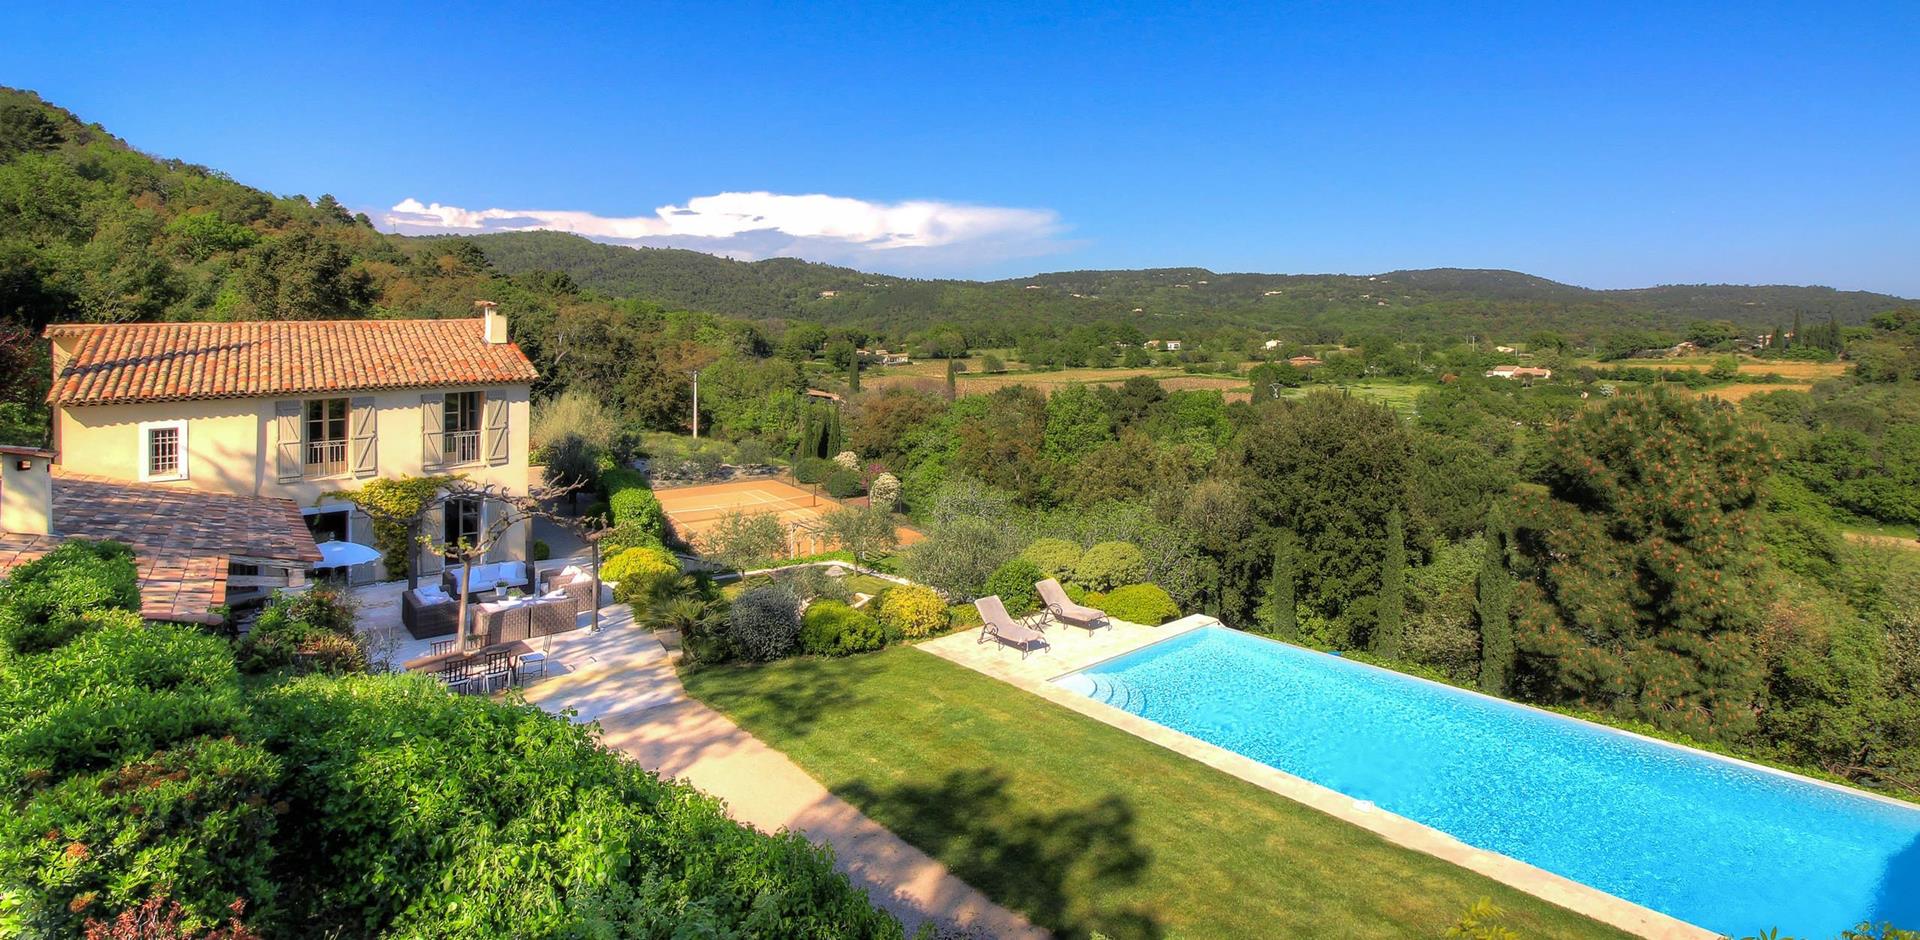  Swimming pool, Le Mas Paisible, Grimaud and Sainte Maxime